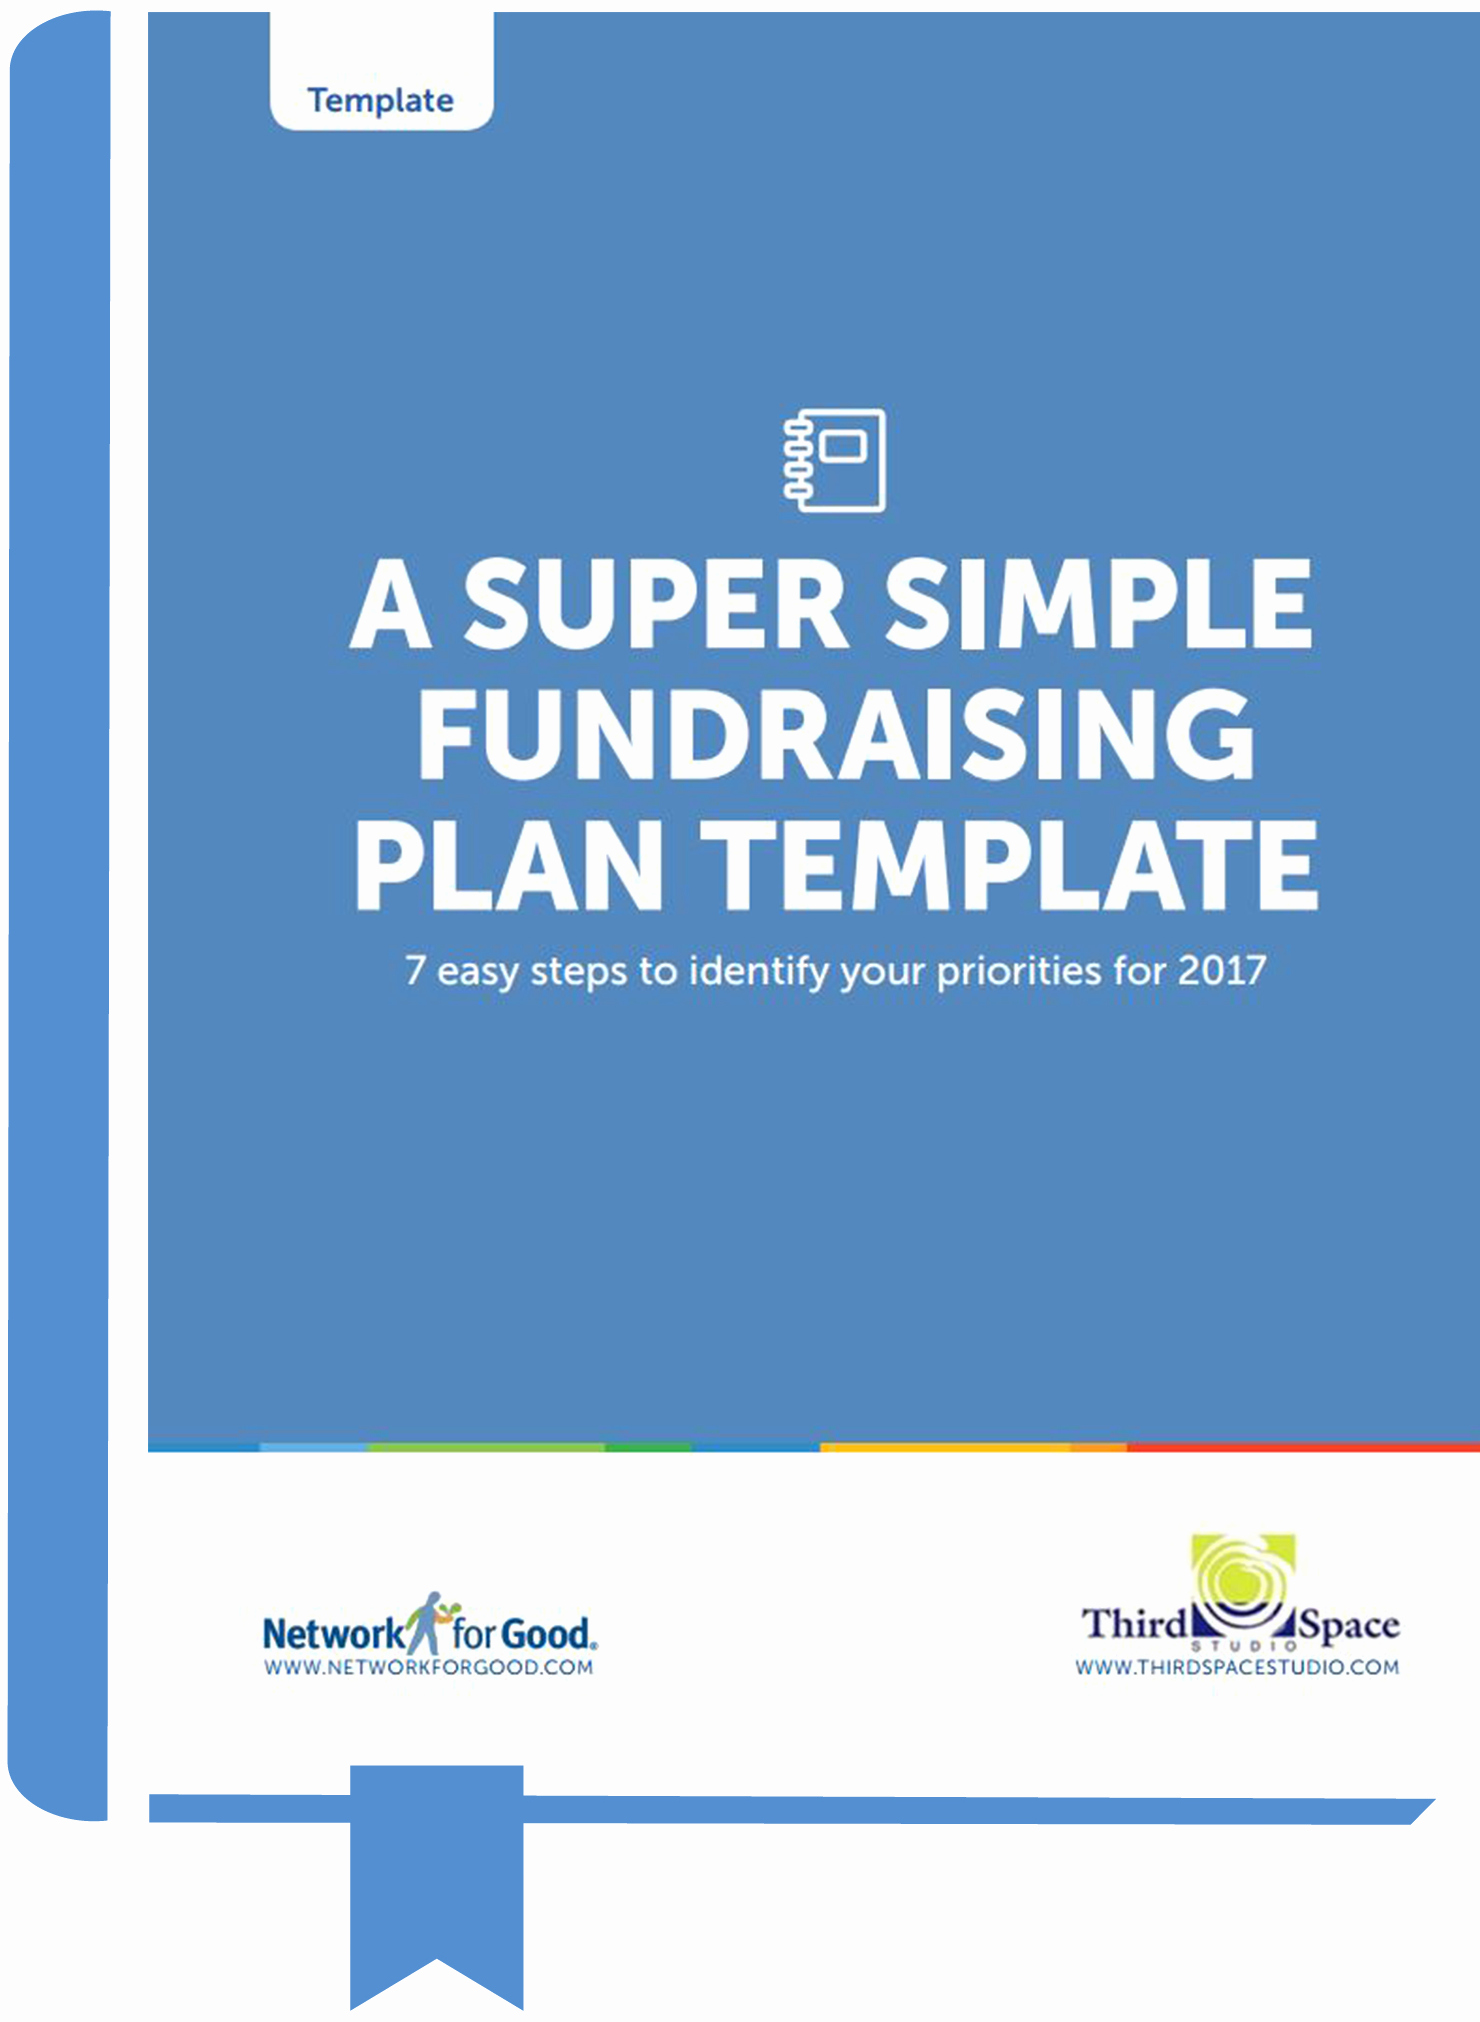 The Super Simple Fundraising Plan for Nonprofits